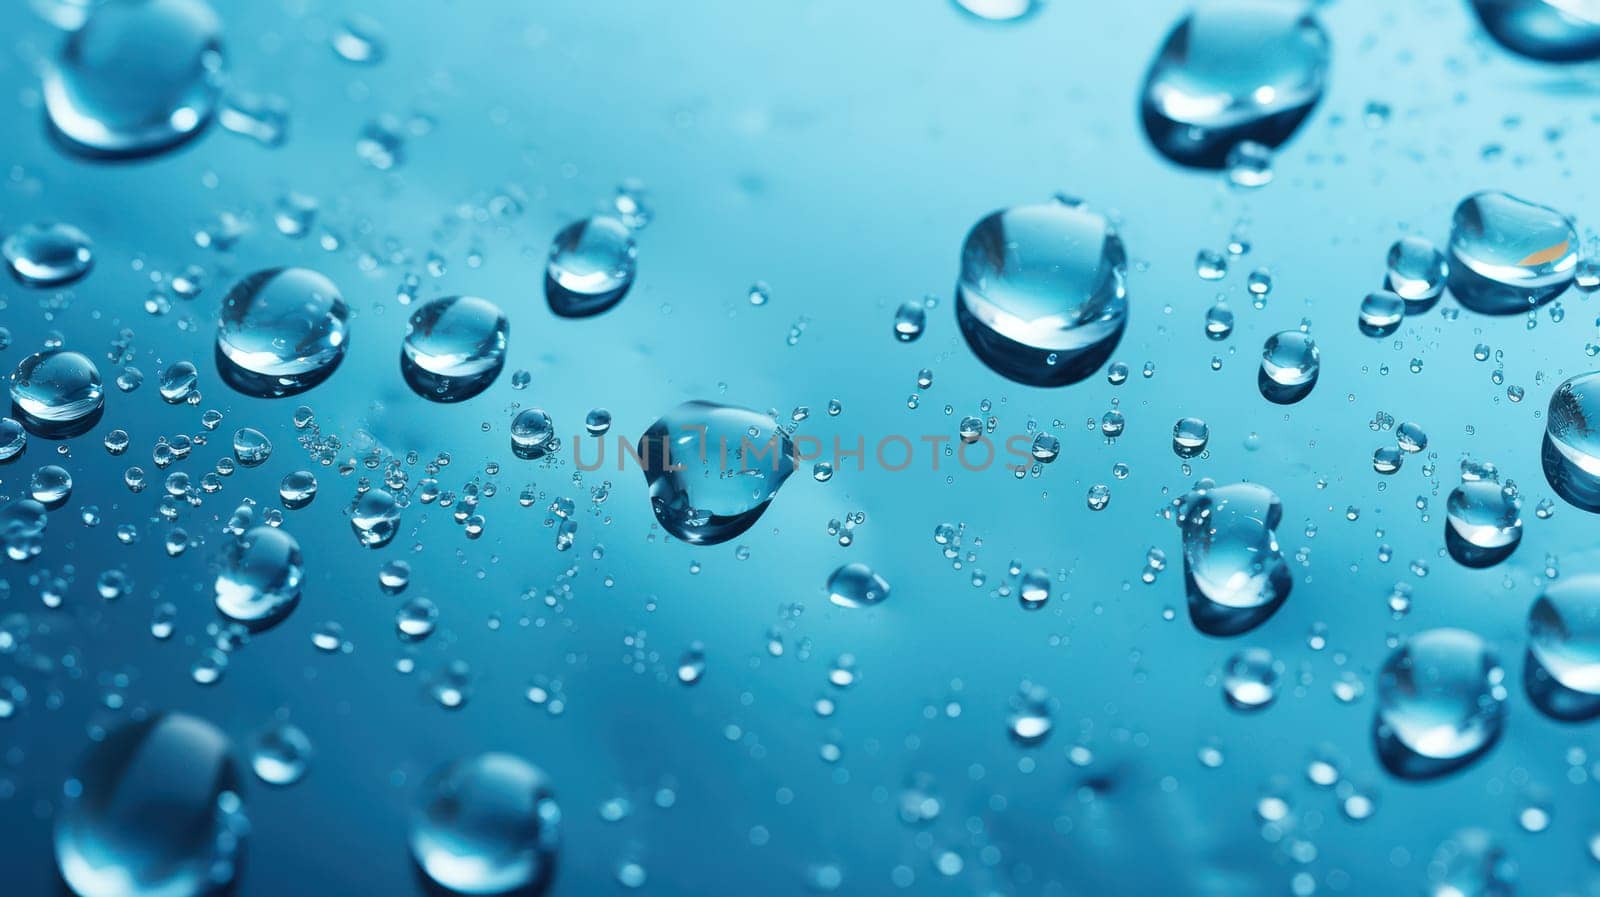 Refreshing Raindrop Ripples on Blue Water Surface: Abstract Liquid Macro Texture with Clear Droplets and Fresh Dew